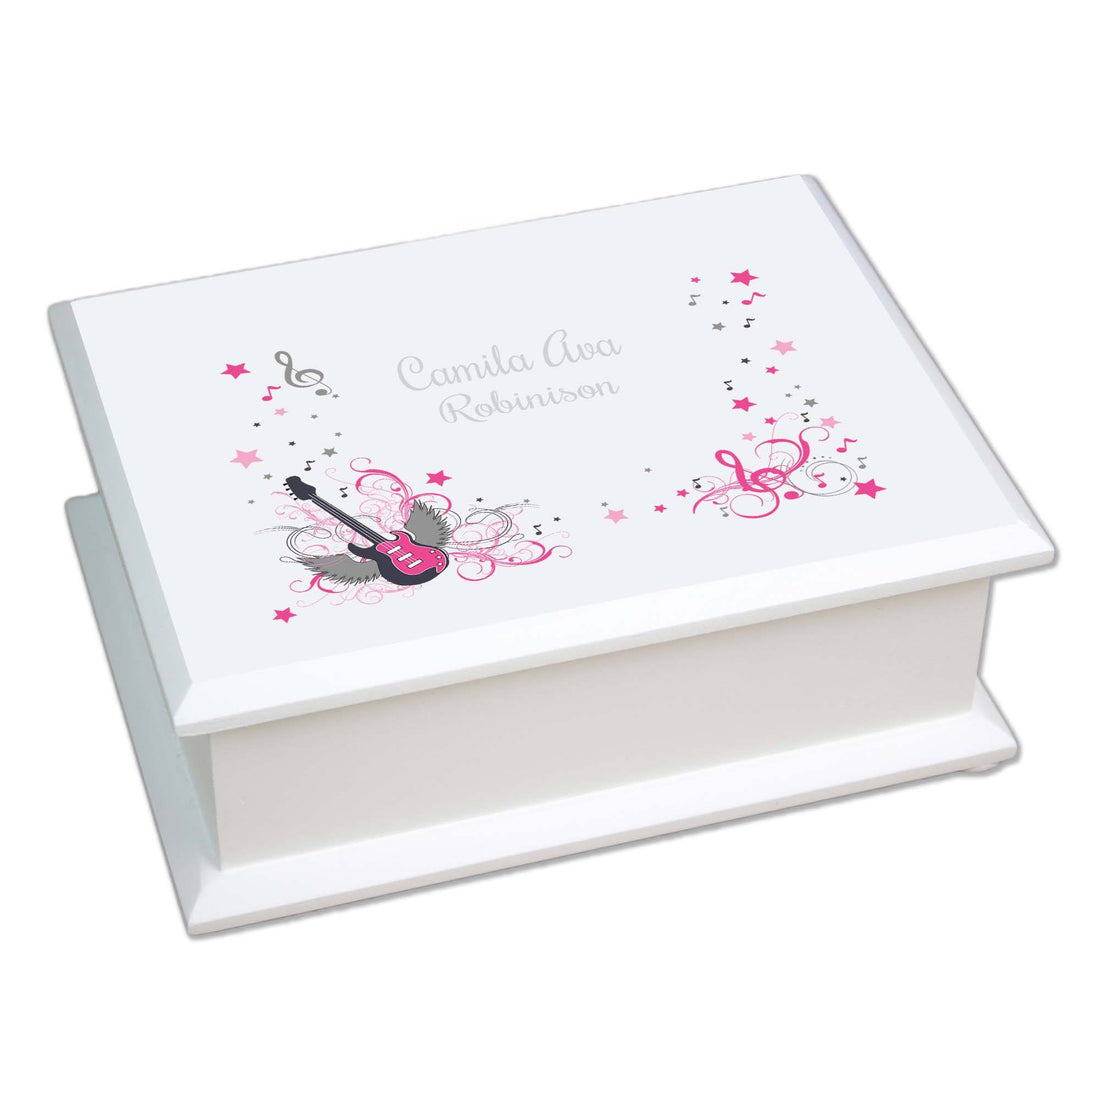 Personalized Lift Top Jewelry Box with Pink Rock Star design